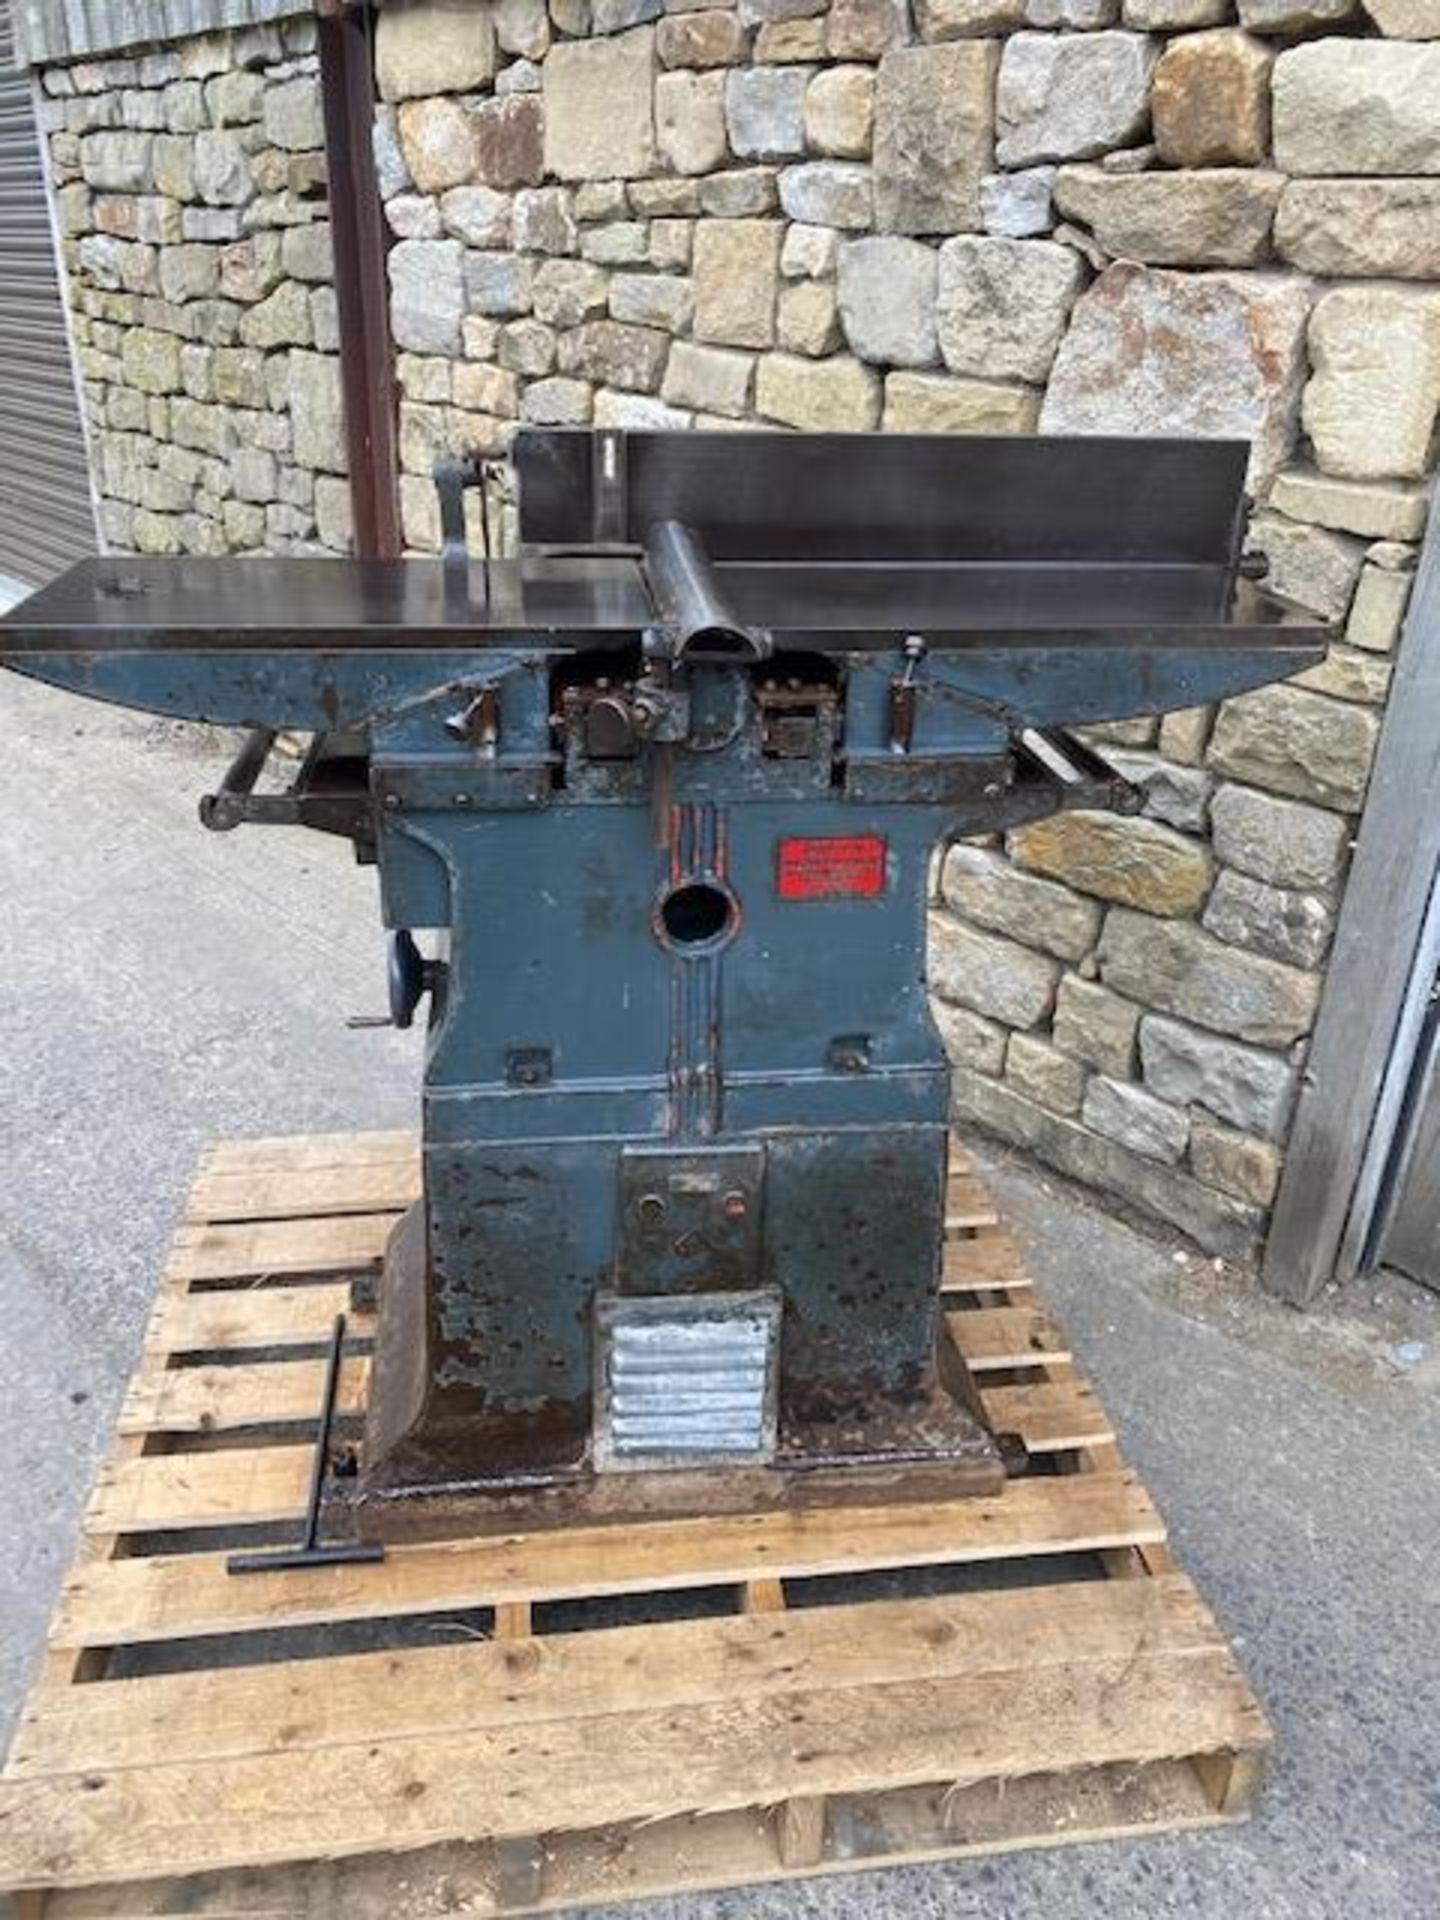 Northern 12in. x 9in. Planer Thicknesser (vendors comments - good condition), lot location -